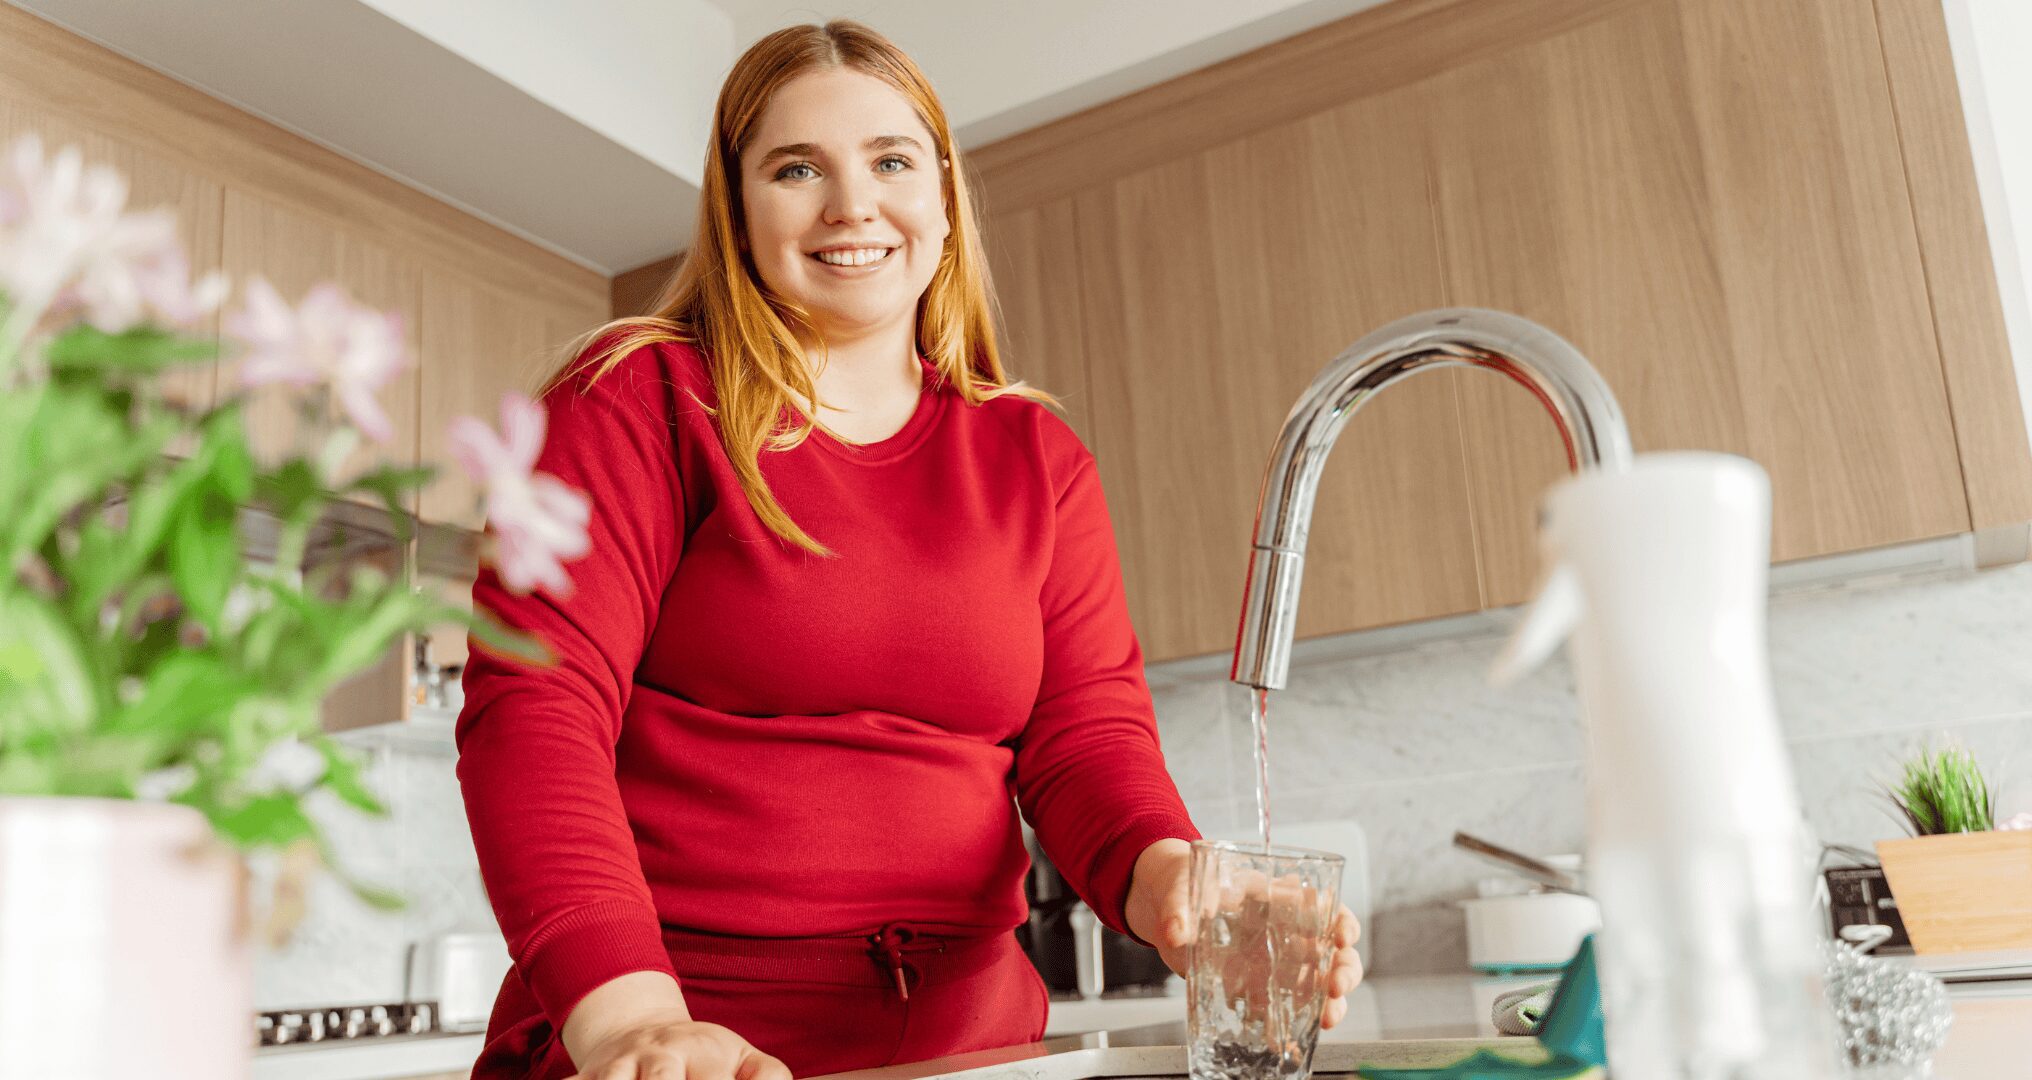 young woman smiling getting water at kitchen faucet